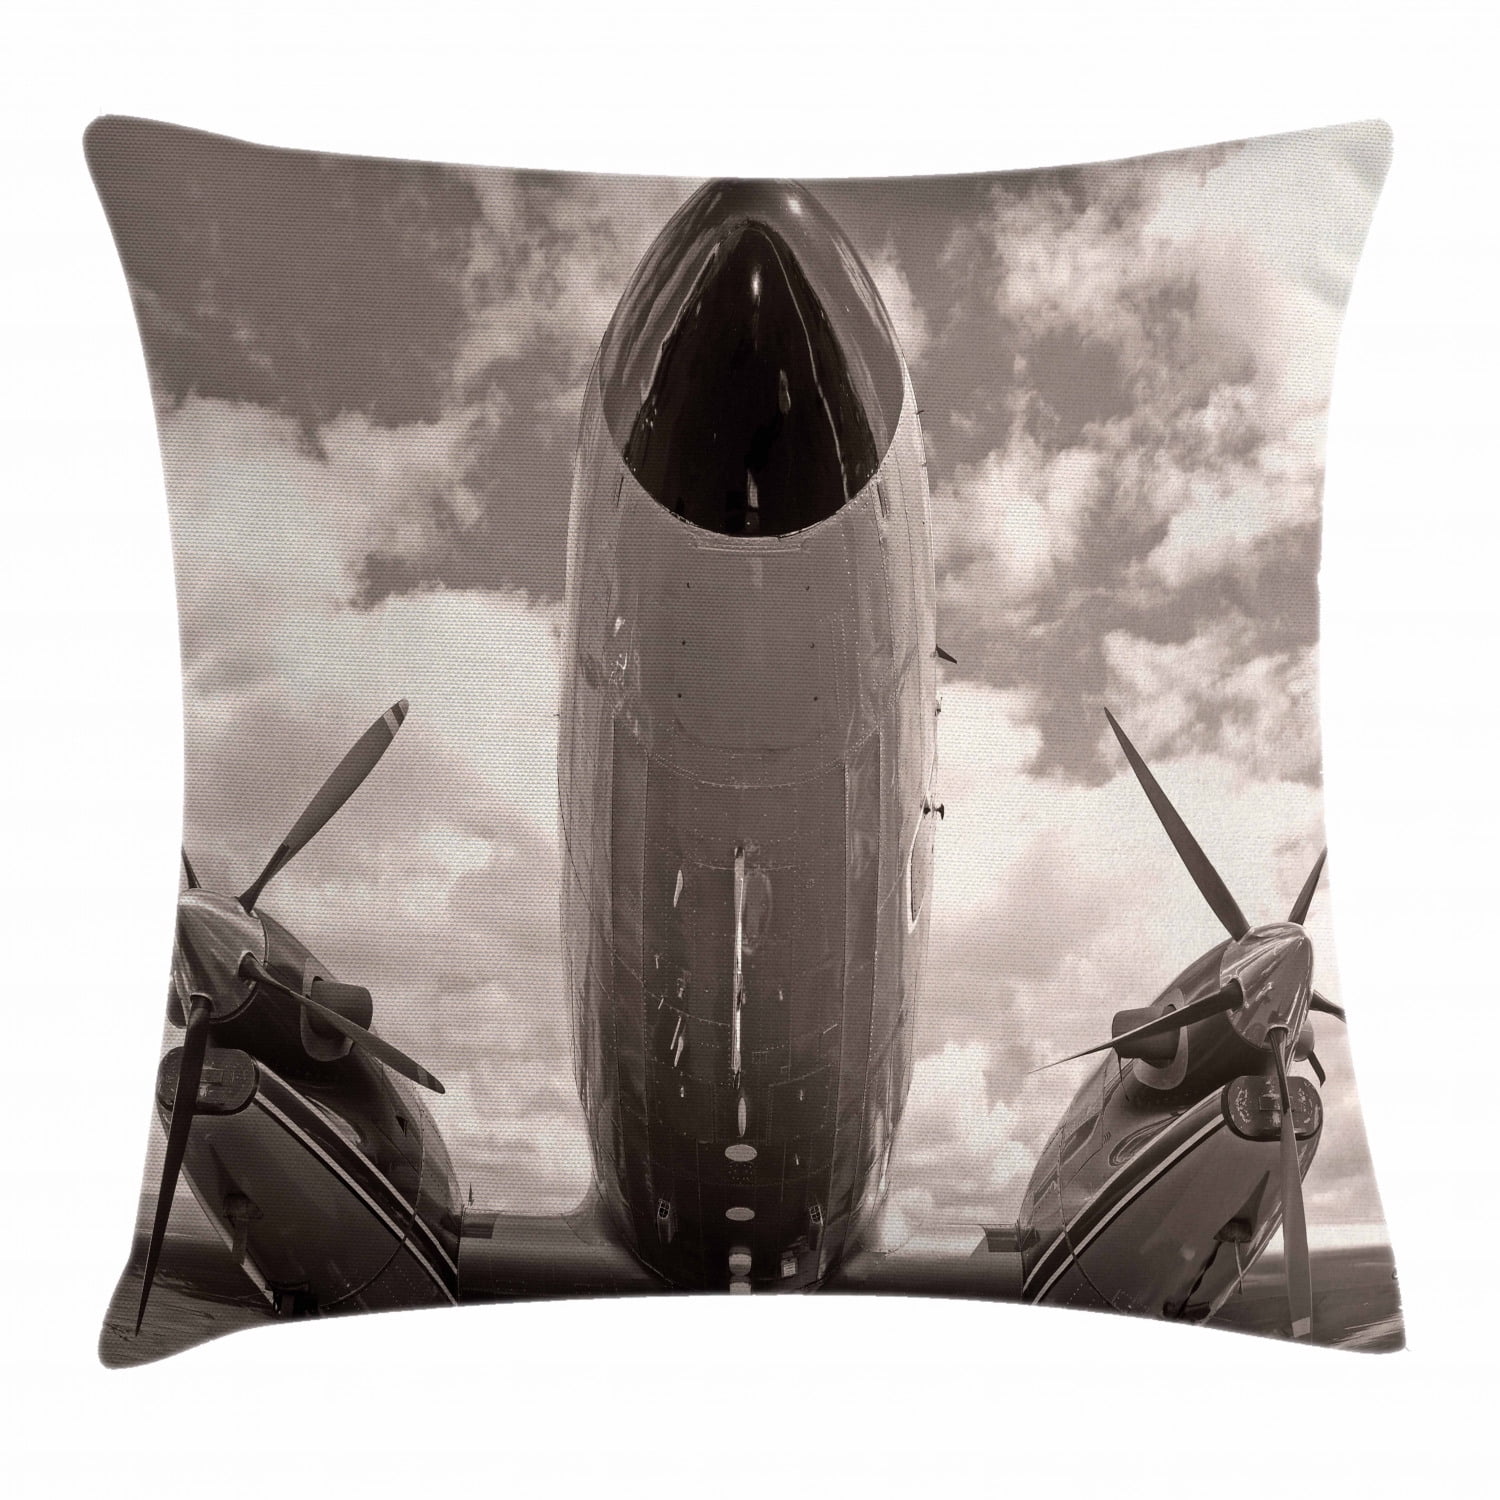 Flannel Fleece Accent Piece Soft Couch Cover for Adults Multicolor Retro Plane in The Sky Trees Sixties Propeller Engine Historical Flight Murky 70 x 90 Ambesonne Vintage Throw Blanket